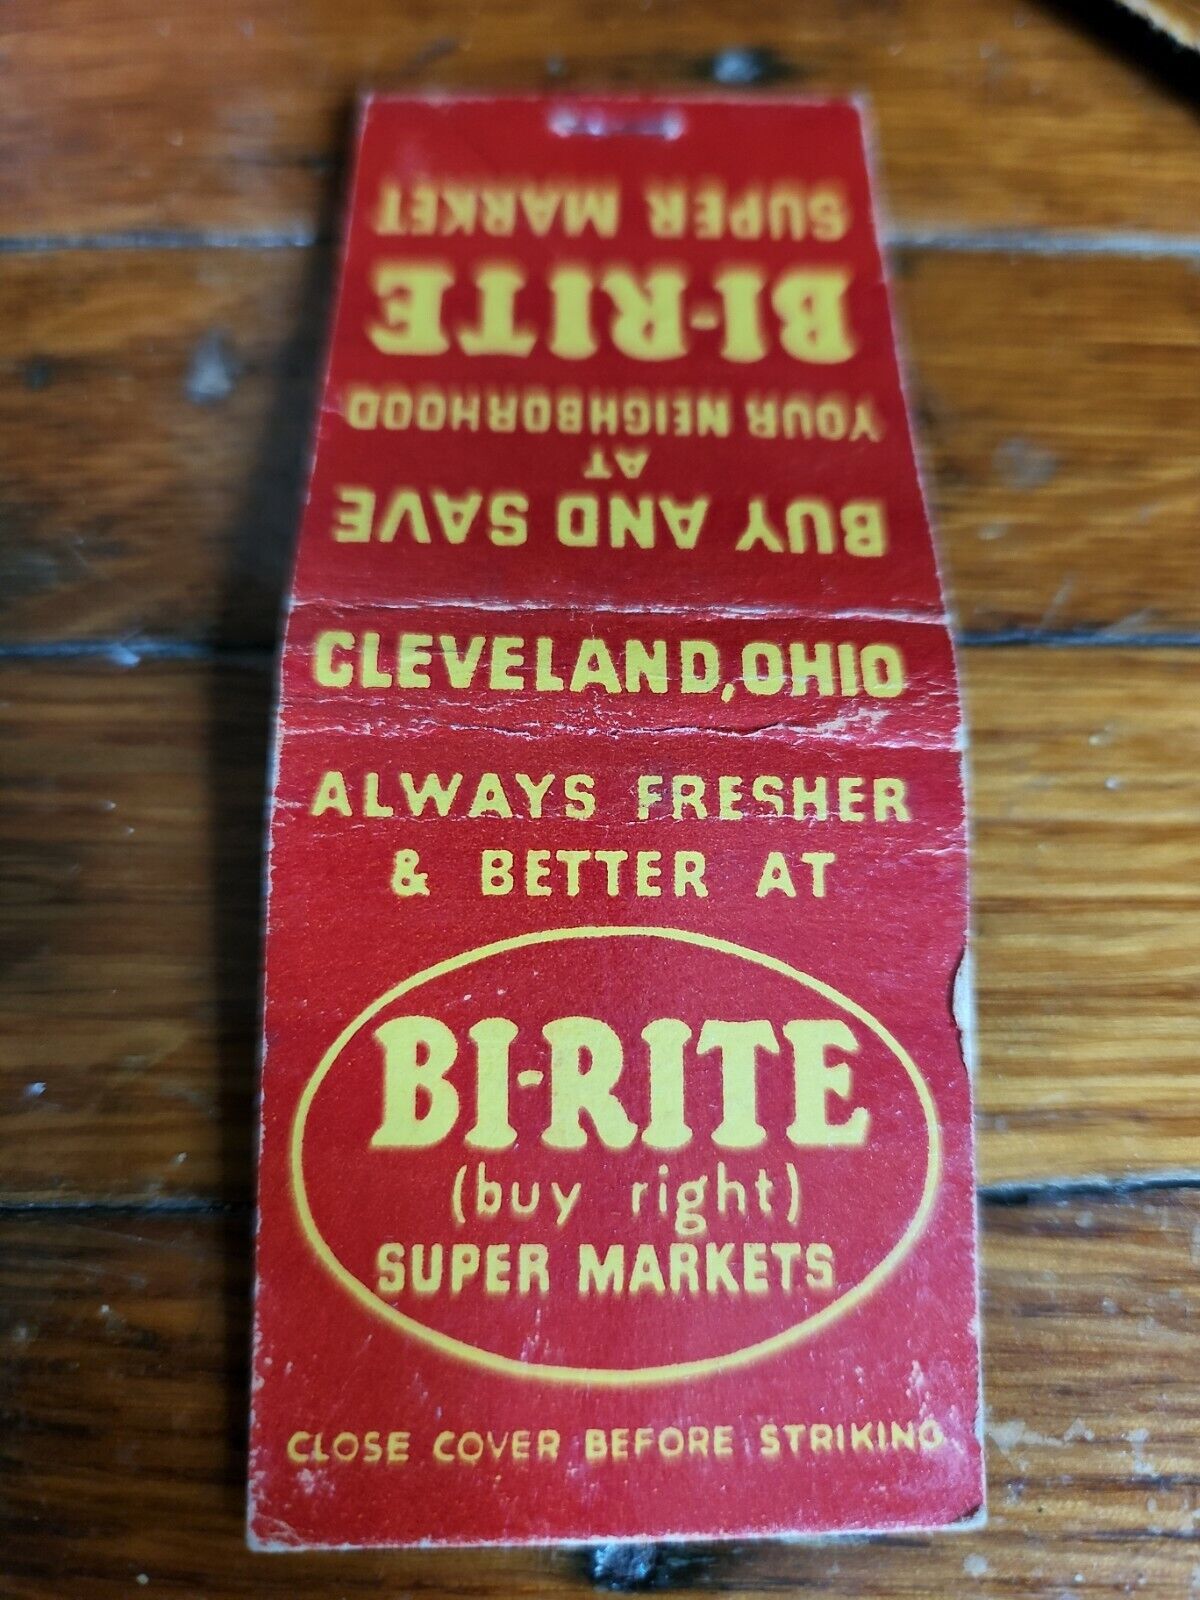 Vintage Bi-Rite Matchbook Cover, Red w/ Yellow, Cleveland OH